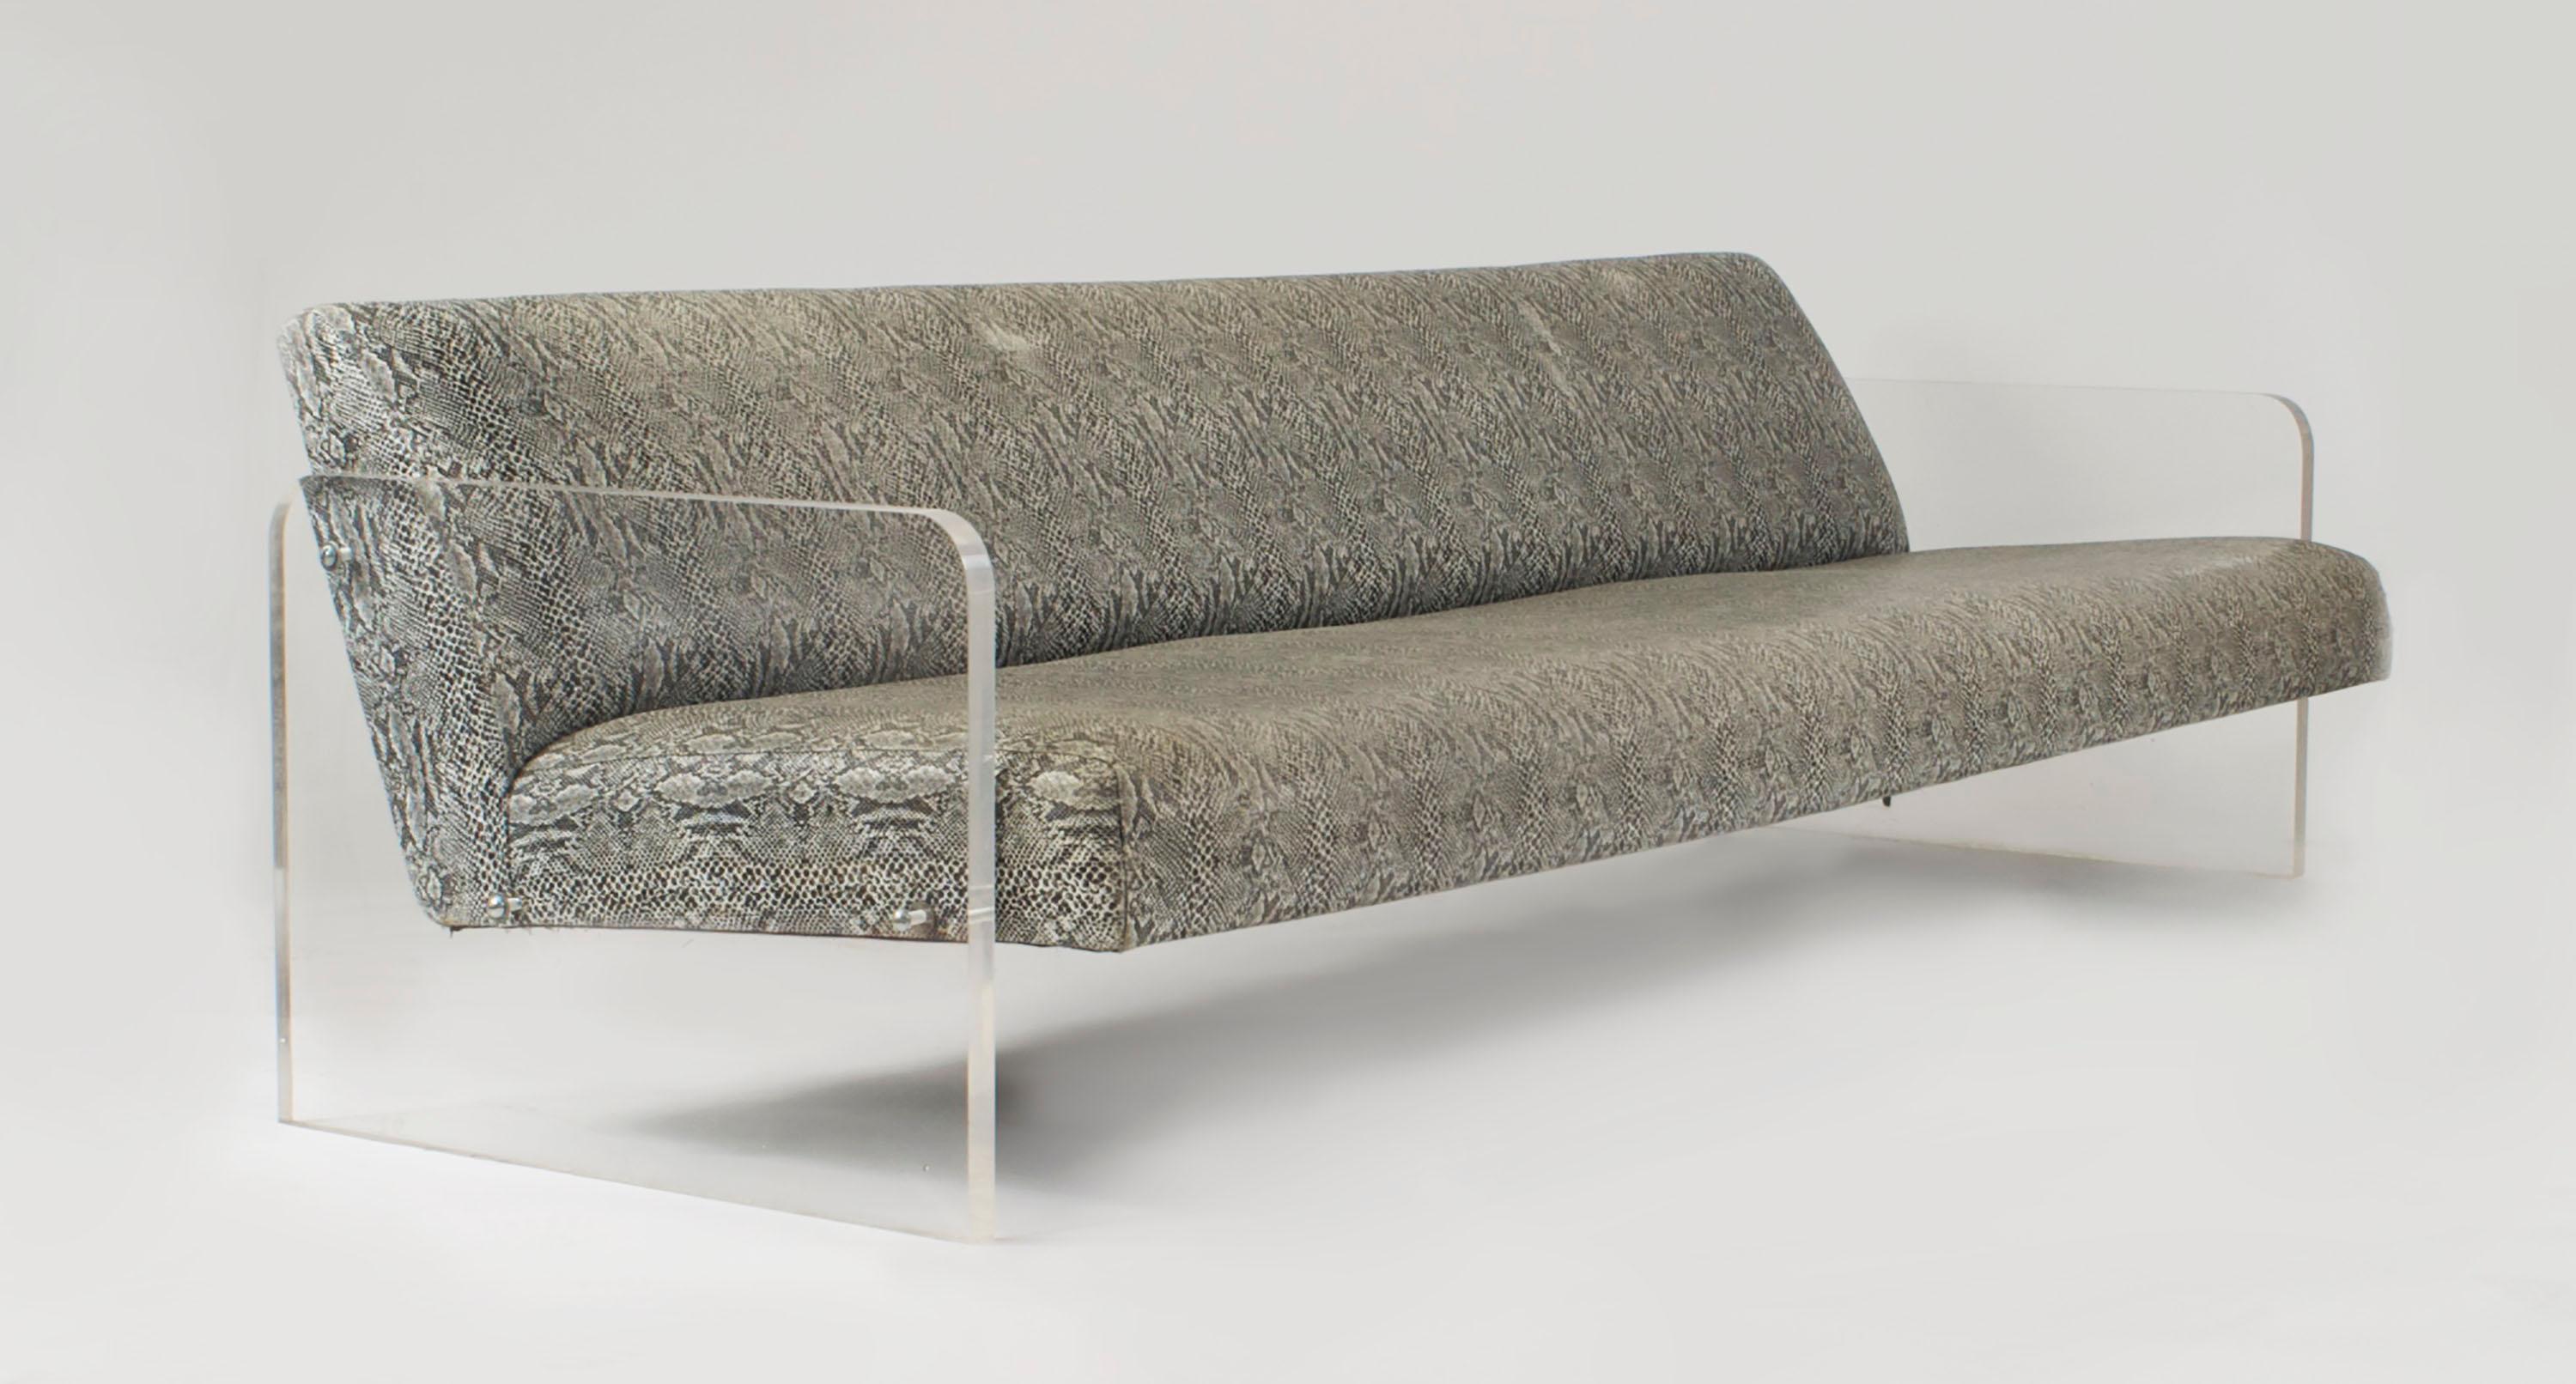 American Mid-Century (1970s) large settee with Lucite side arms and upholstered in faux python (att: VLADIMIR KAGAN)
